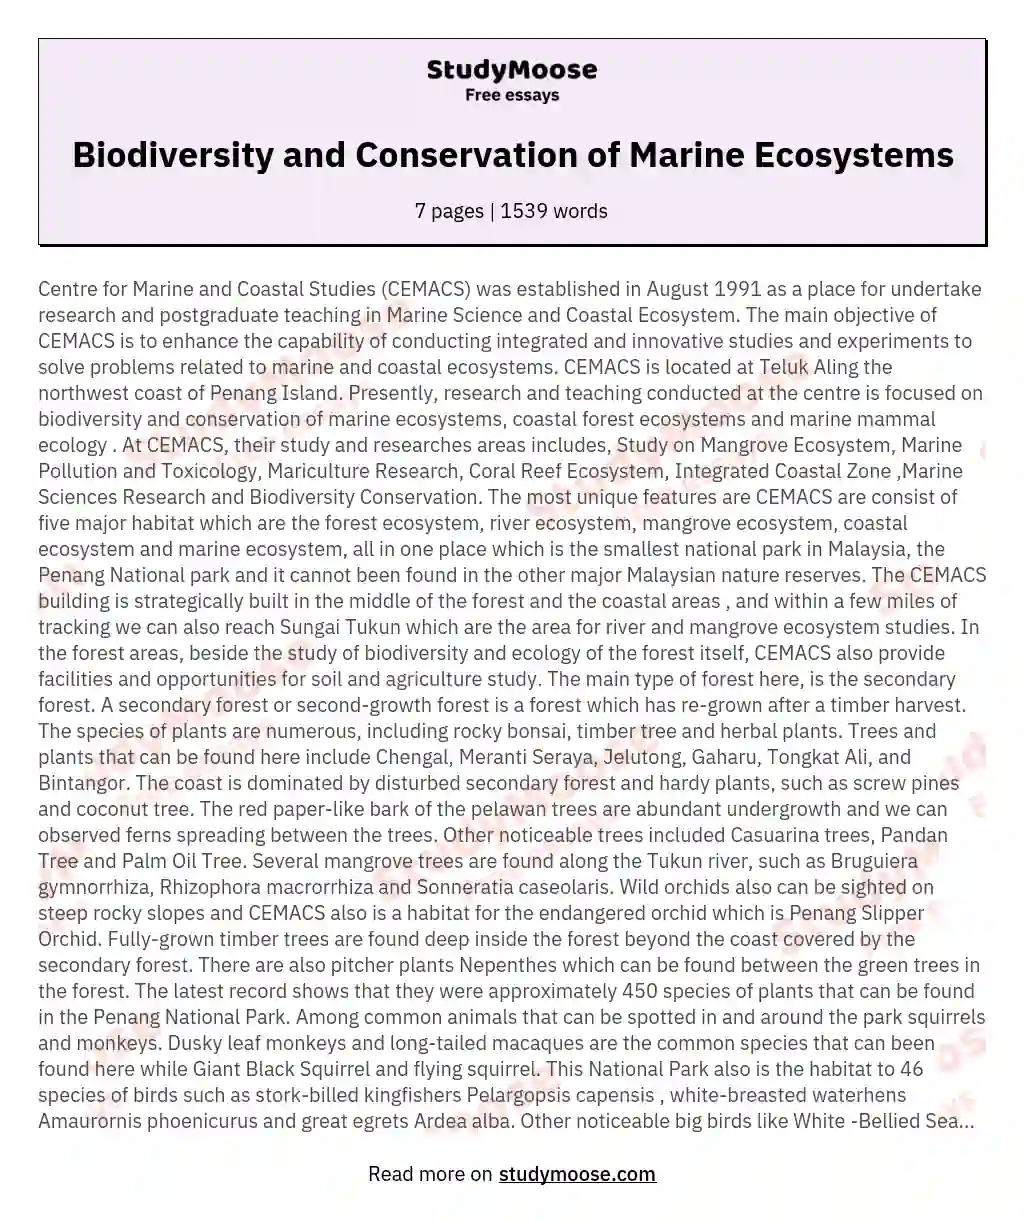 Biodiversity and Conservation of Marine Ecosystems essay